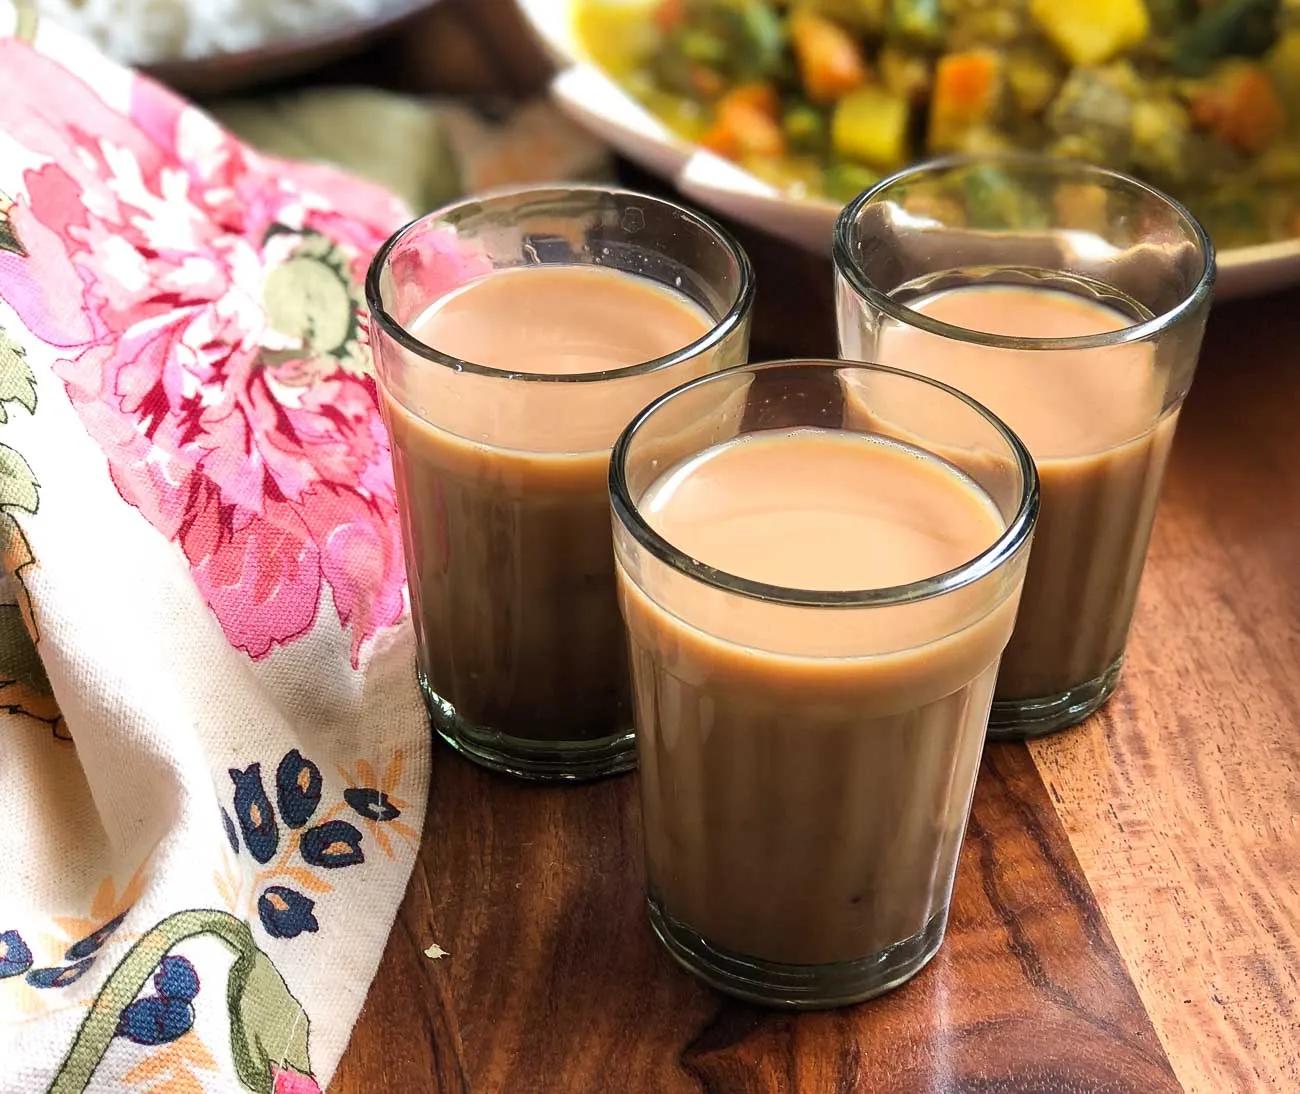 Gulkand Chai Recipe - A Rose Flavored Indian Tea by Archana&amp;#39;s Kitchen